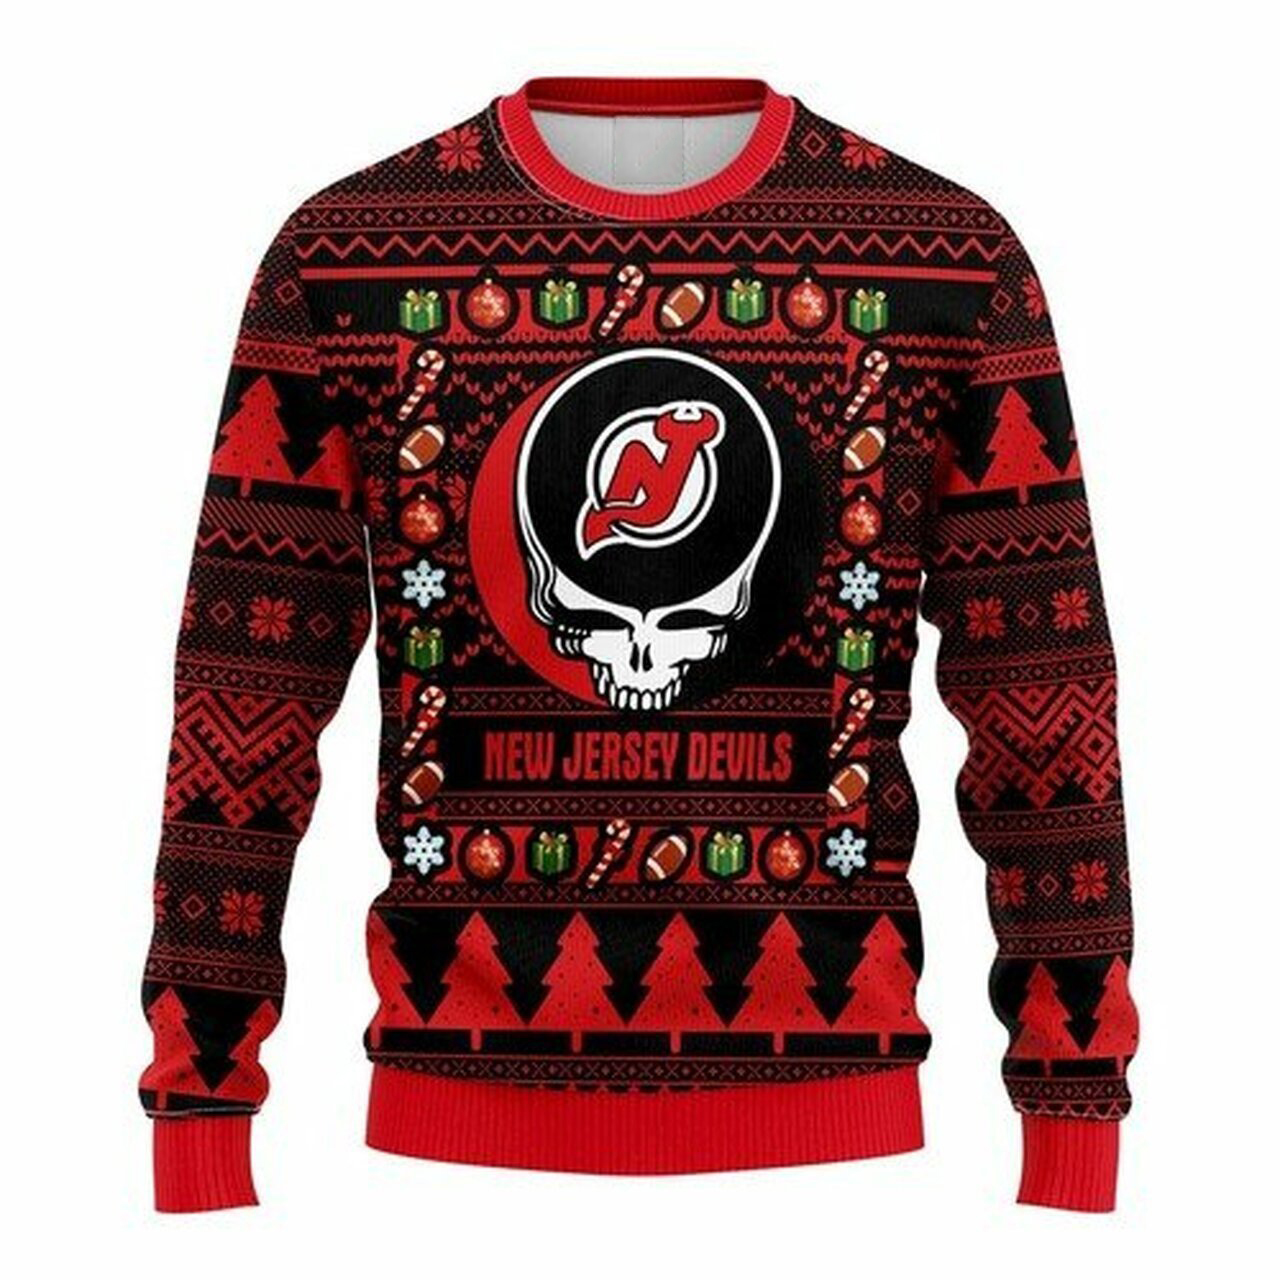 NHL New Jersey Devils Grateful Dead ugly christmas sweater